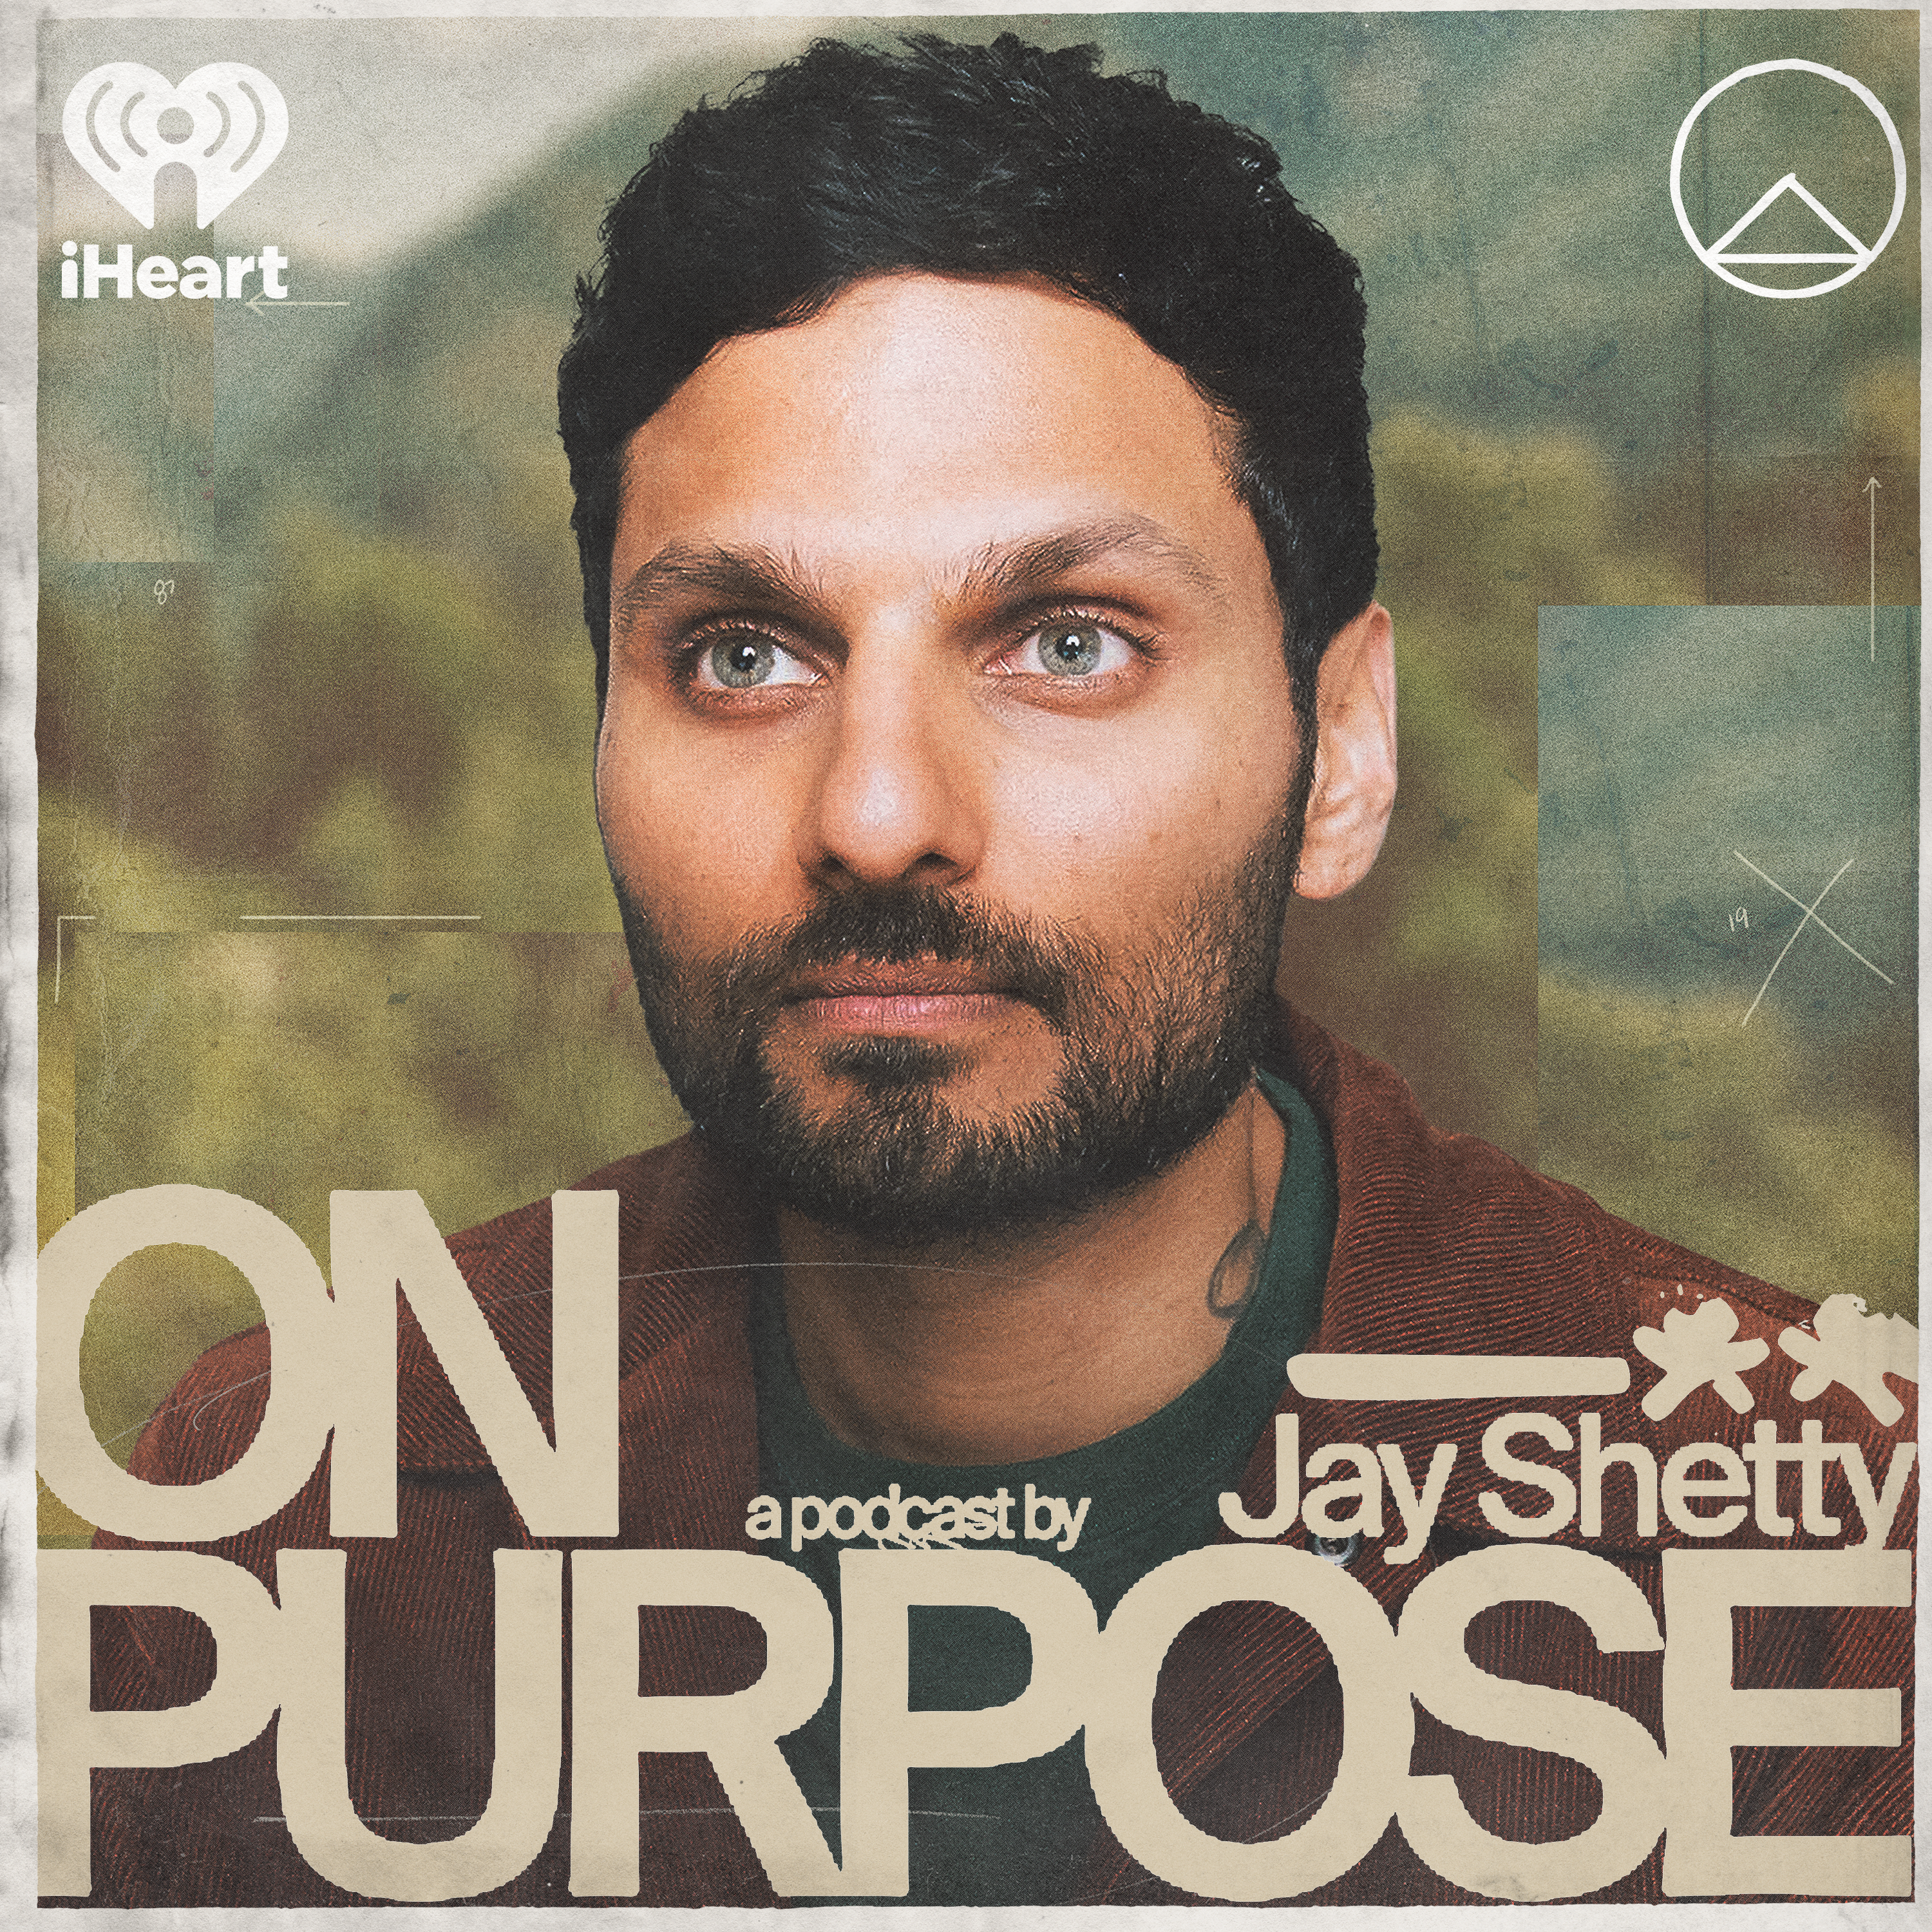 Gwyneth Paltrow Interviews Jay Shetty ON: Daily Actions to Build Life-Changing Habits & Training Your Mind to Break Old Patterns by iHeartPodcasts